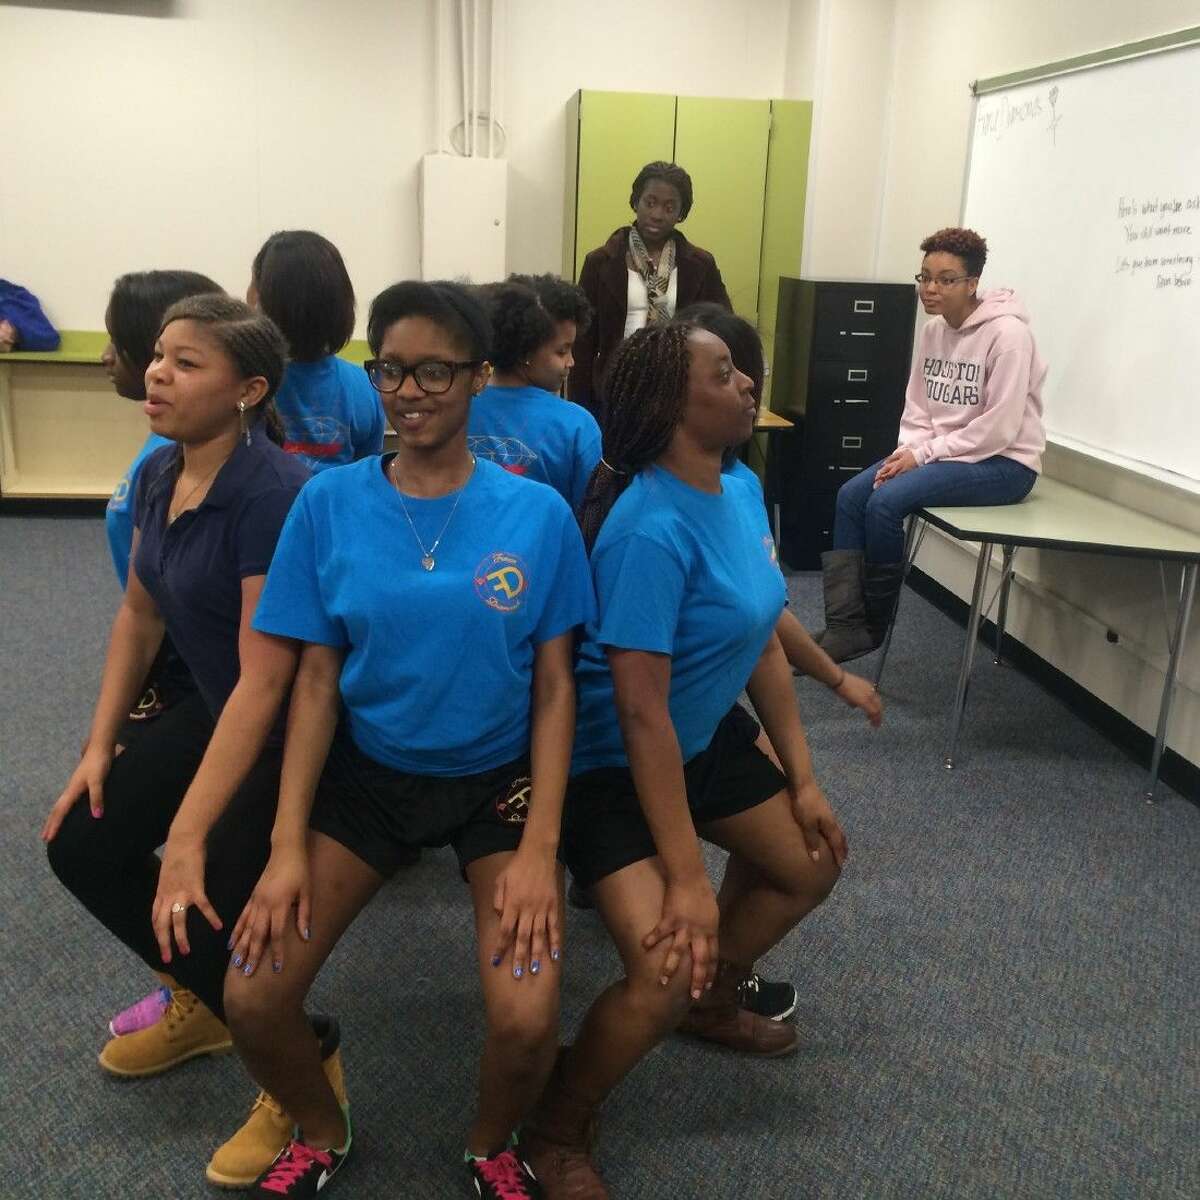 Members of the Fierce Diamonds step team focus on getting their routine down for upcoming performances.